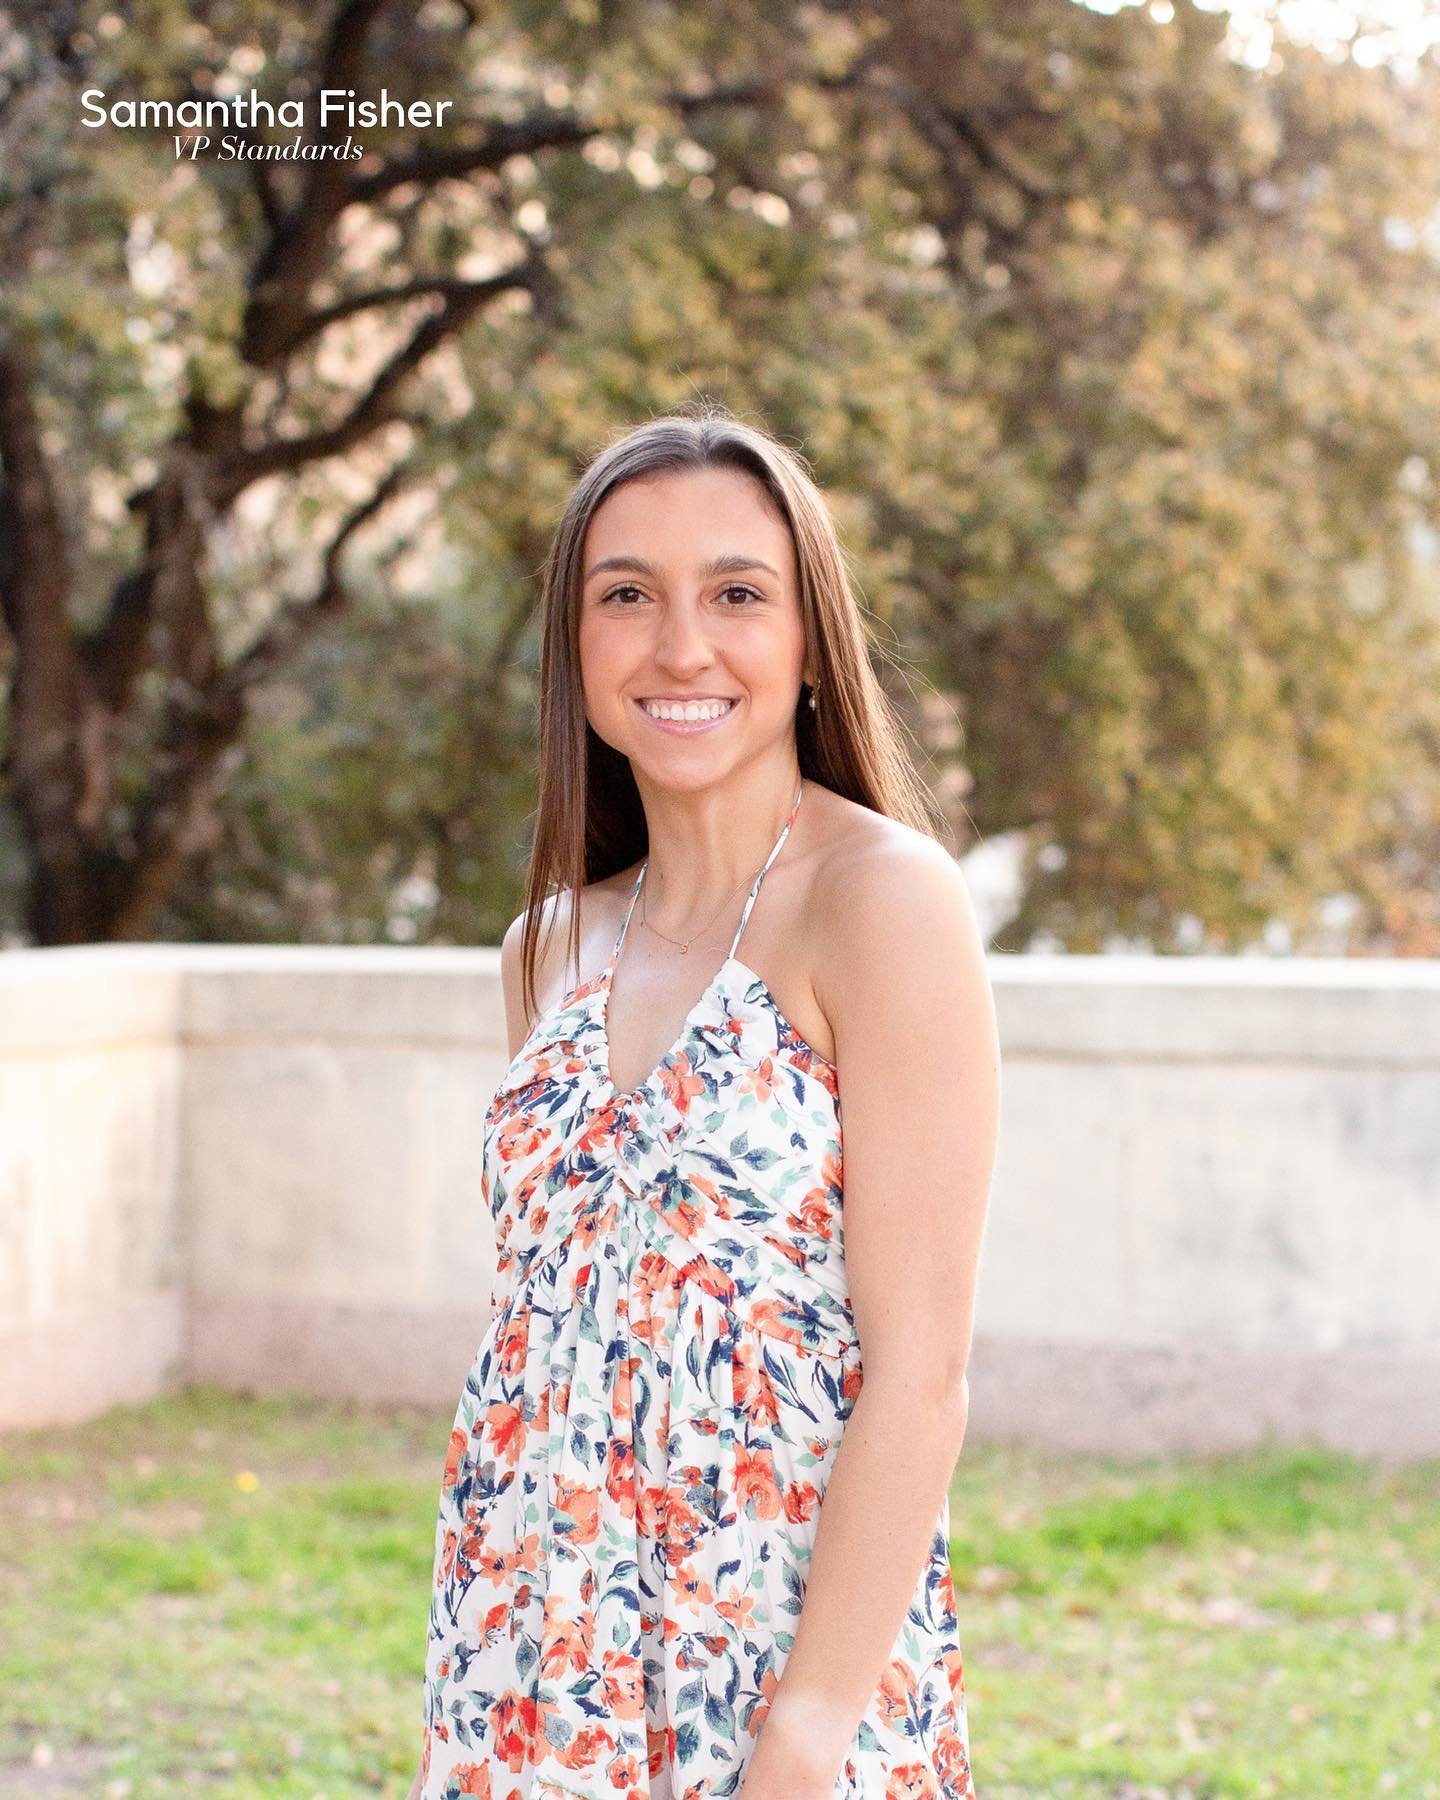 Meet Samantha Fisher, VP Standards!

Hometown: Dallas, Texas
Major: Human Development and Family Sciences
Certificate: Pre-Health Professions

&ldquo;I&rsquo;m thrilled to serve as VP Standards for the University Panhellenic Council! My goal is to fo